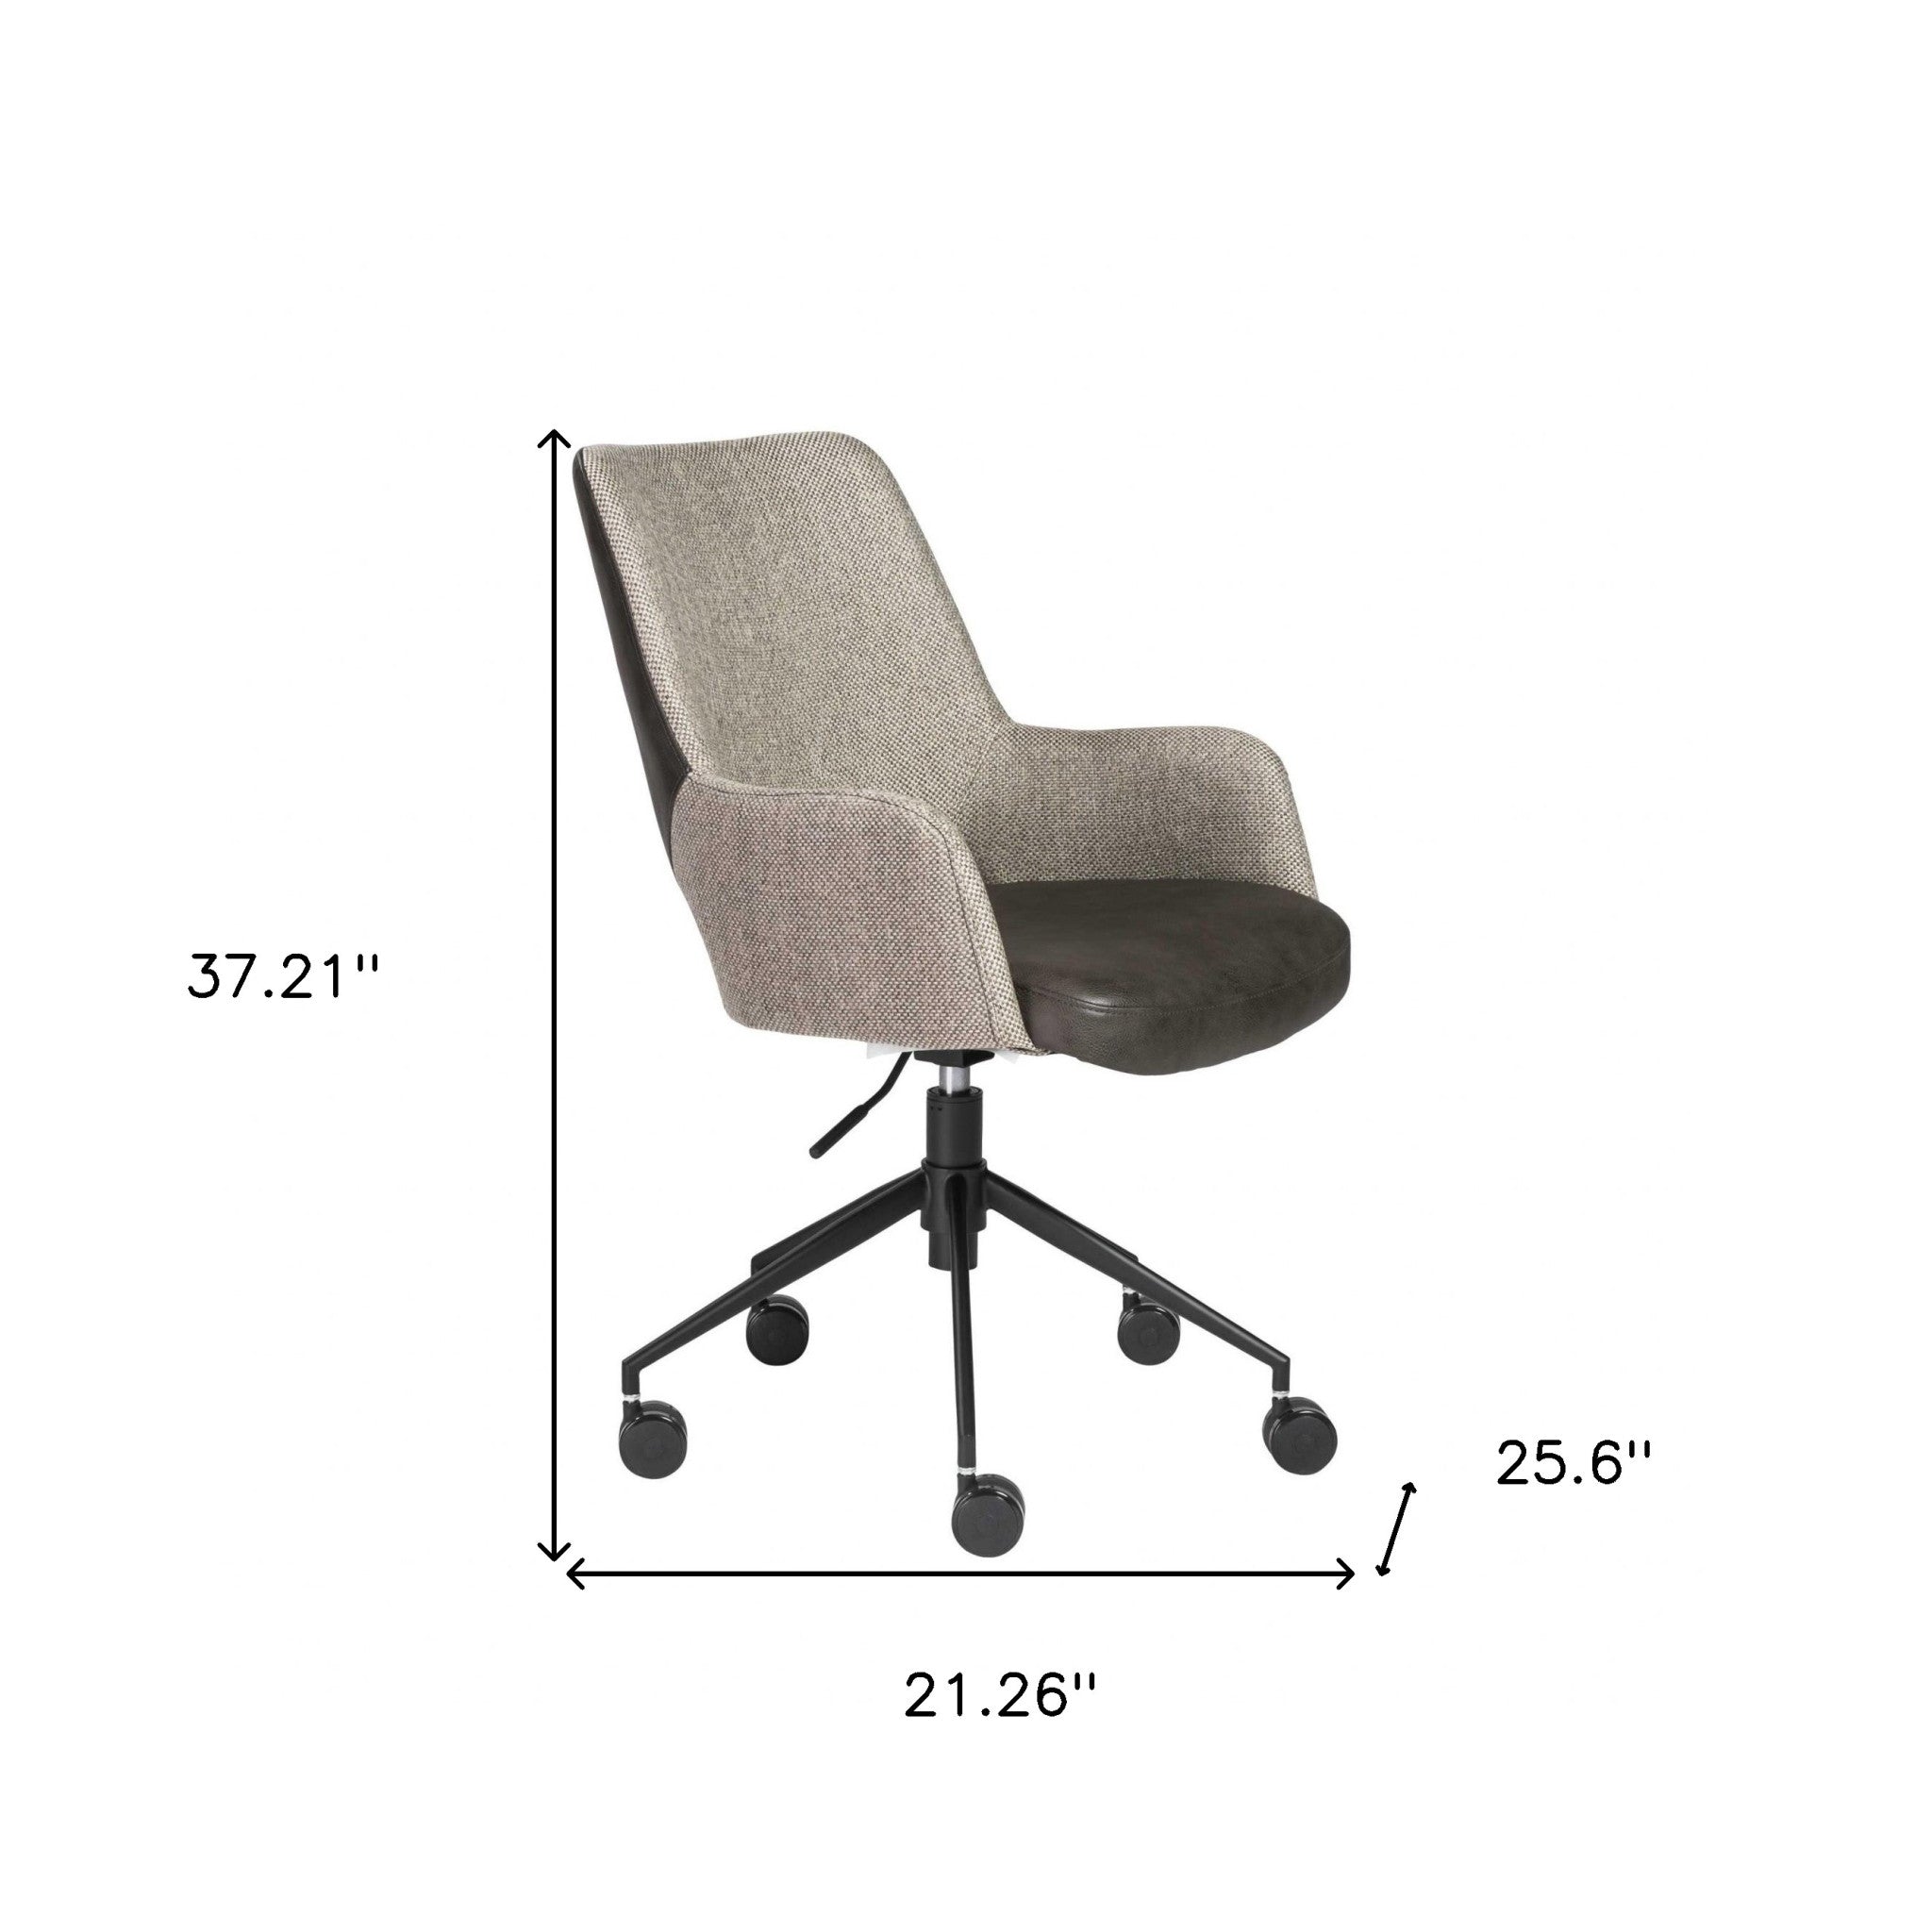 Slate Gray Linen Seat Swivel Adjustable Task Chair Fabric Back Steel Frame - Tuesday Morning-Office Chairs